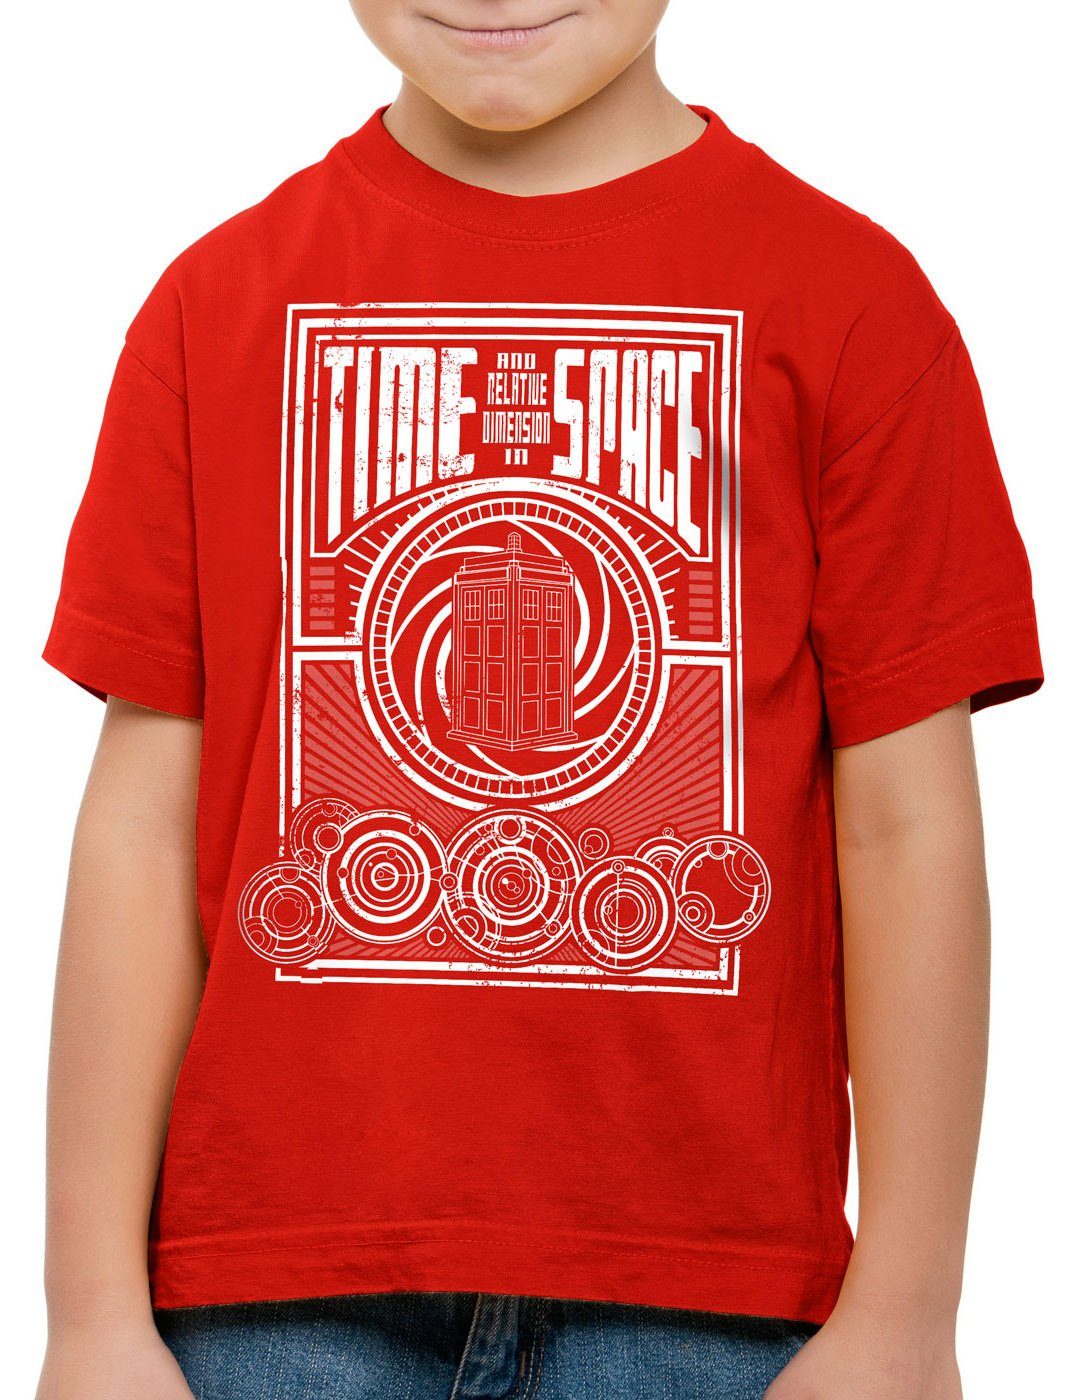 style3 Print-Shirt Kinder T-Shirt Time meets timelord rot notrufzelle Space zeitreise